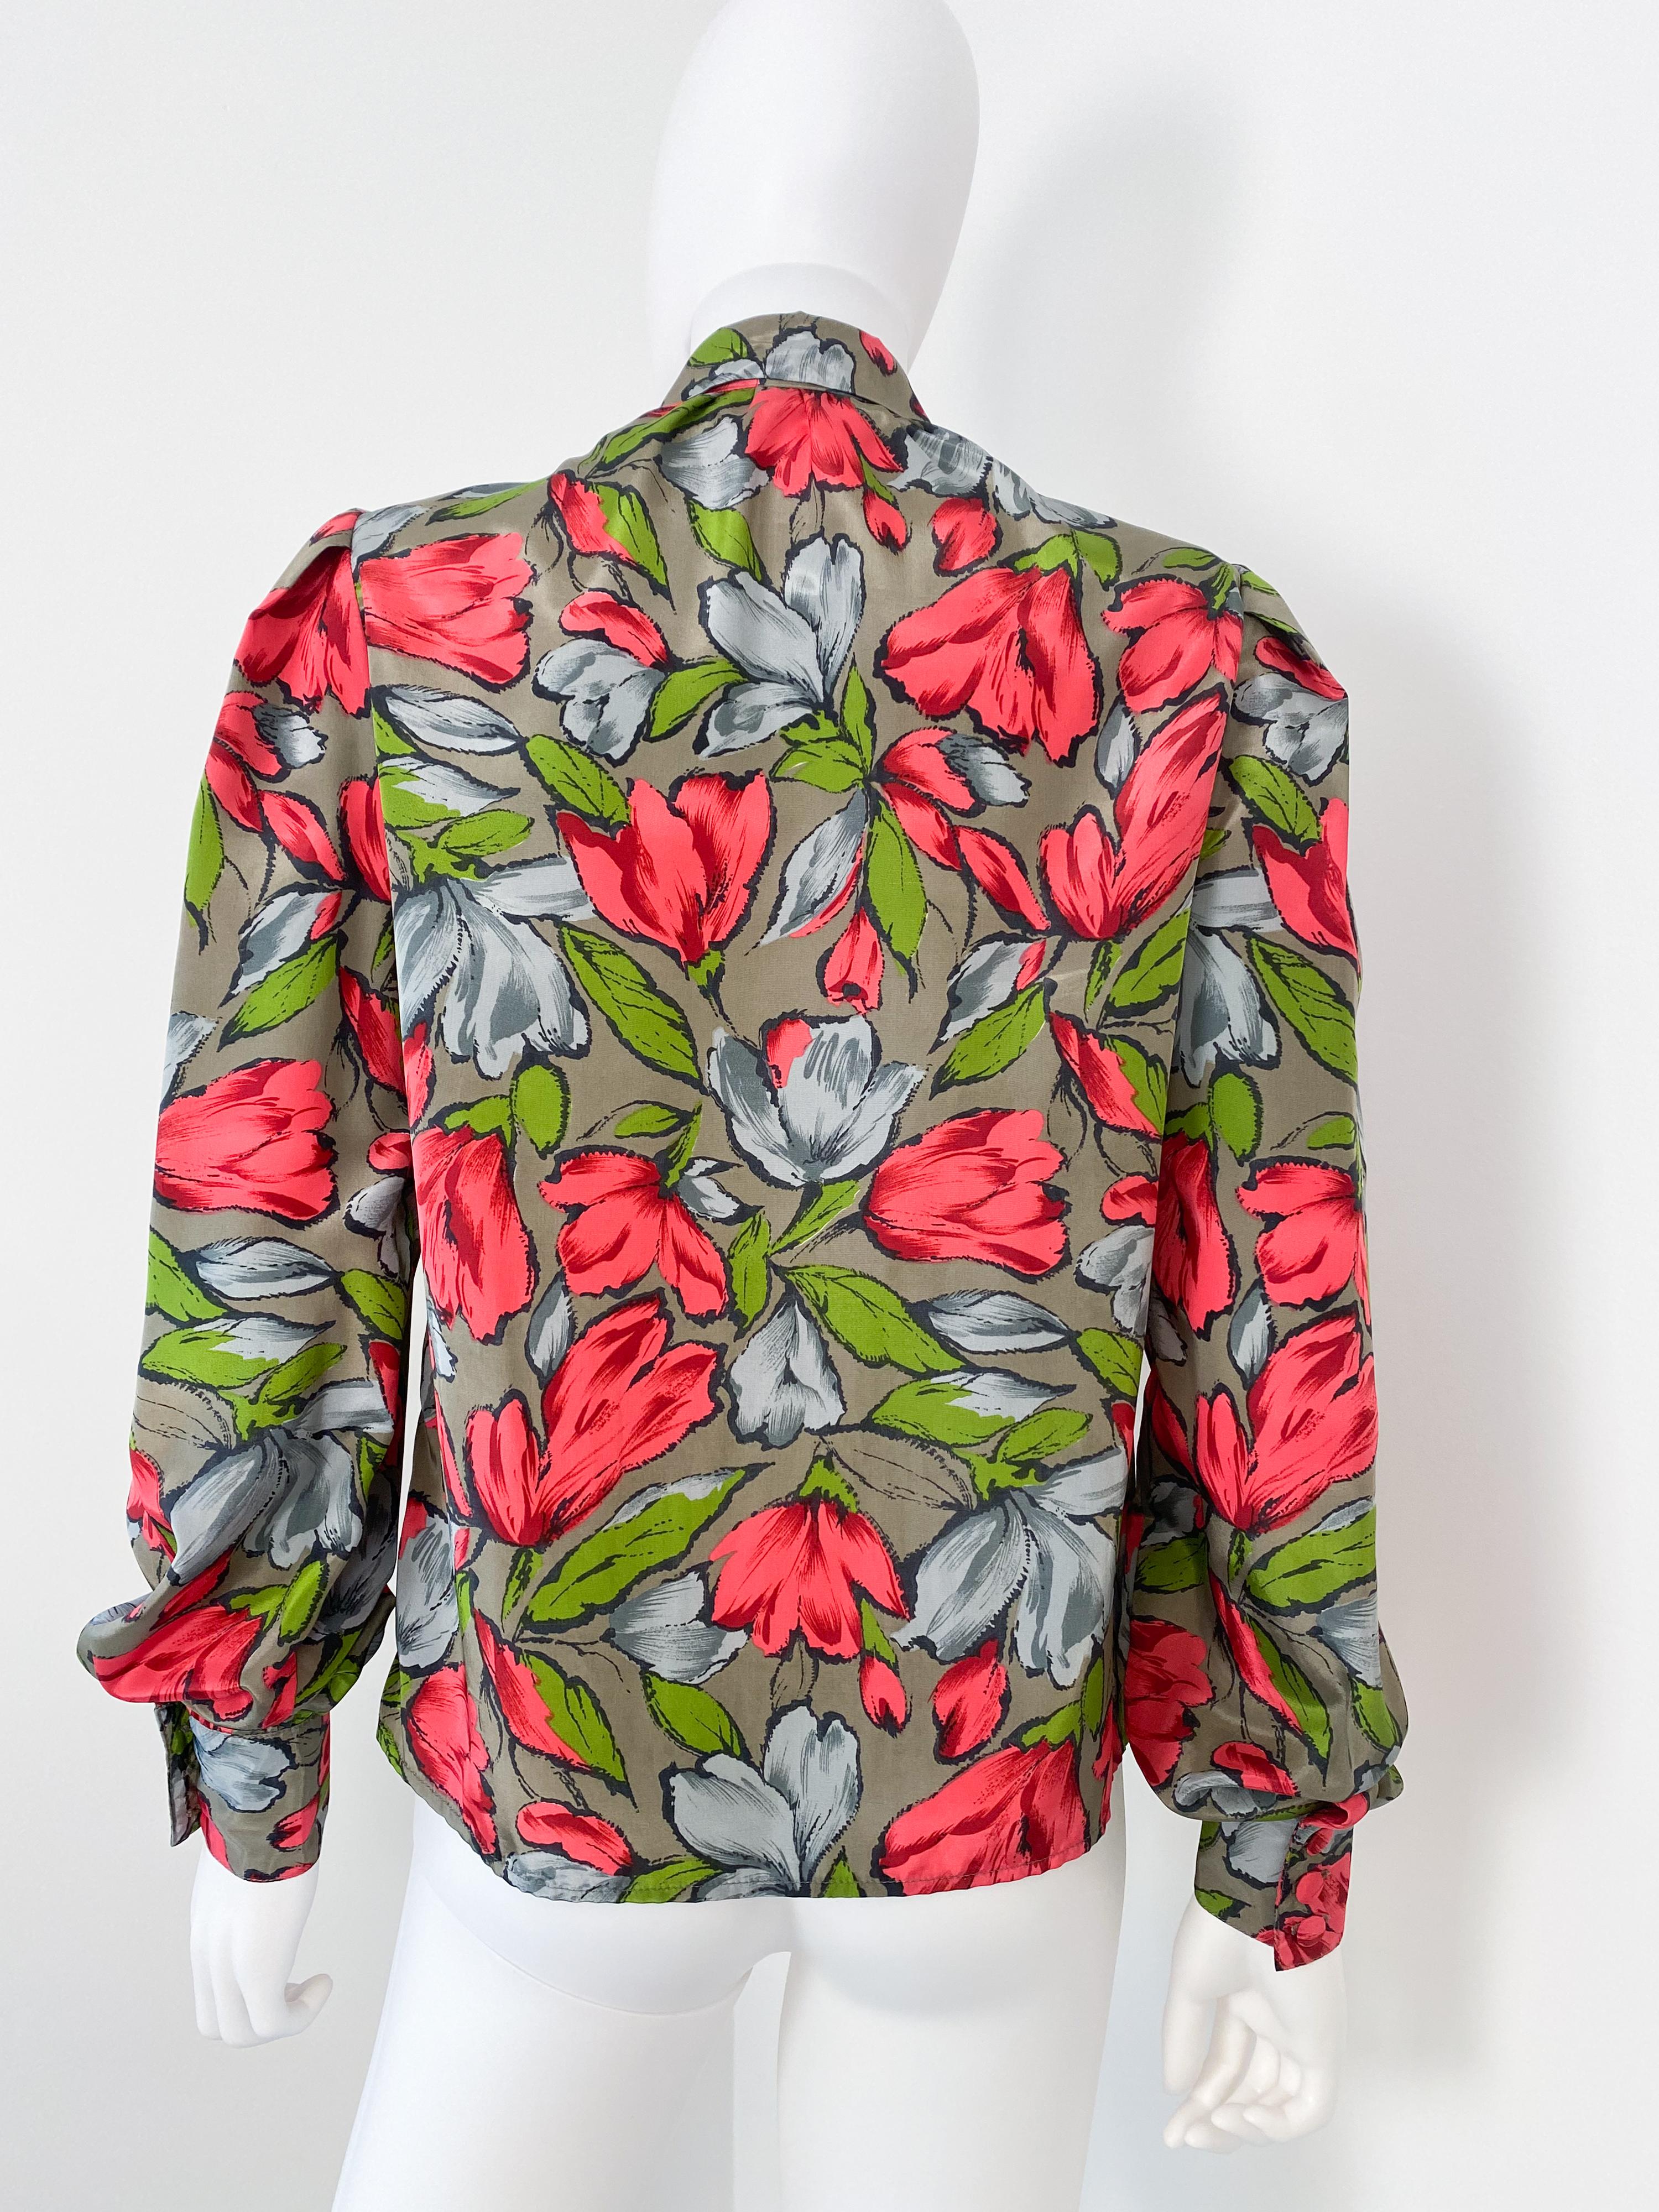 Vintage 1980s Silky Polyester Blouse Top Red and Gray Flowers Size 8/10 For Sale 6